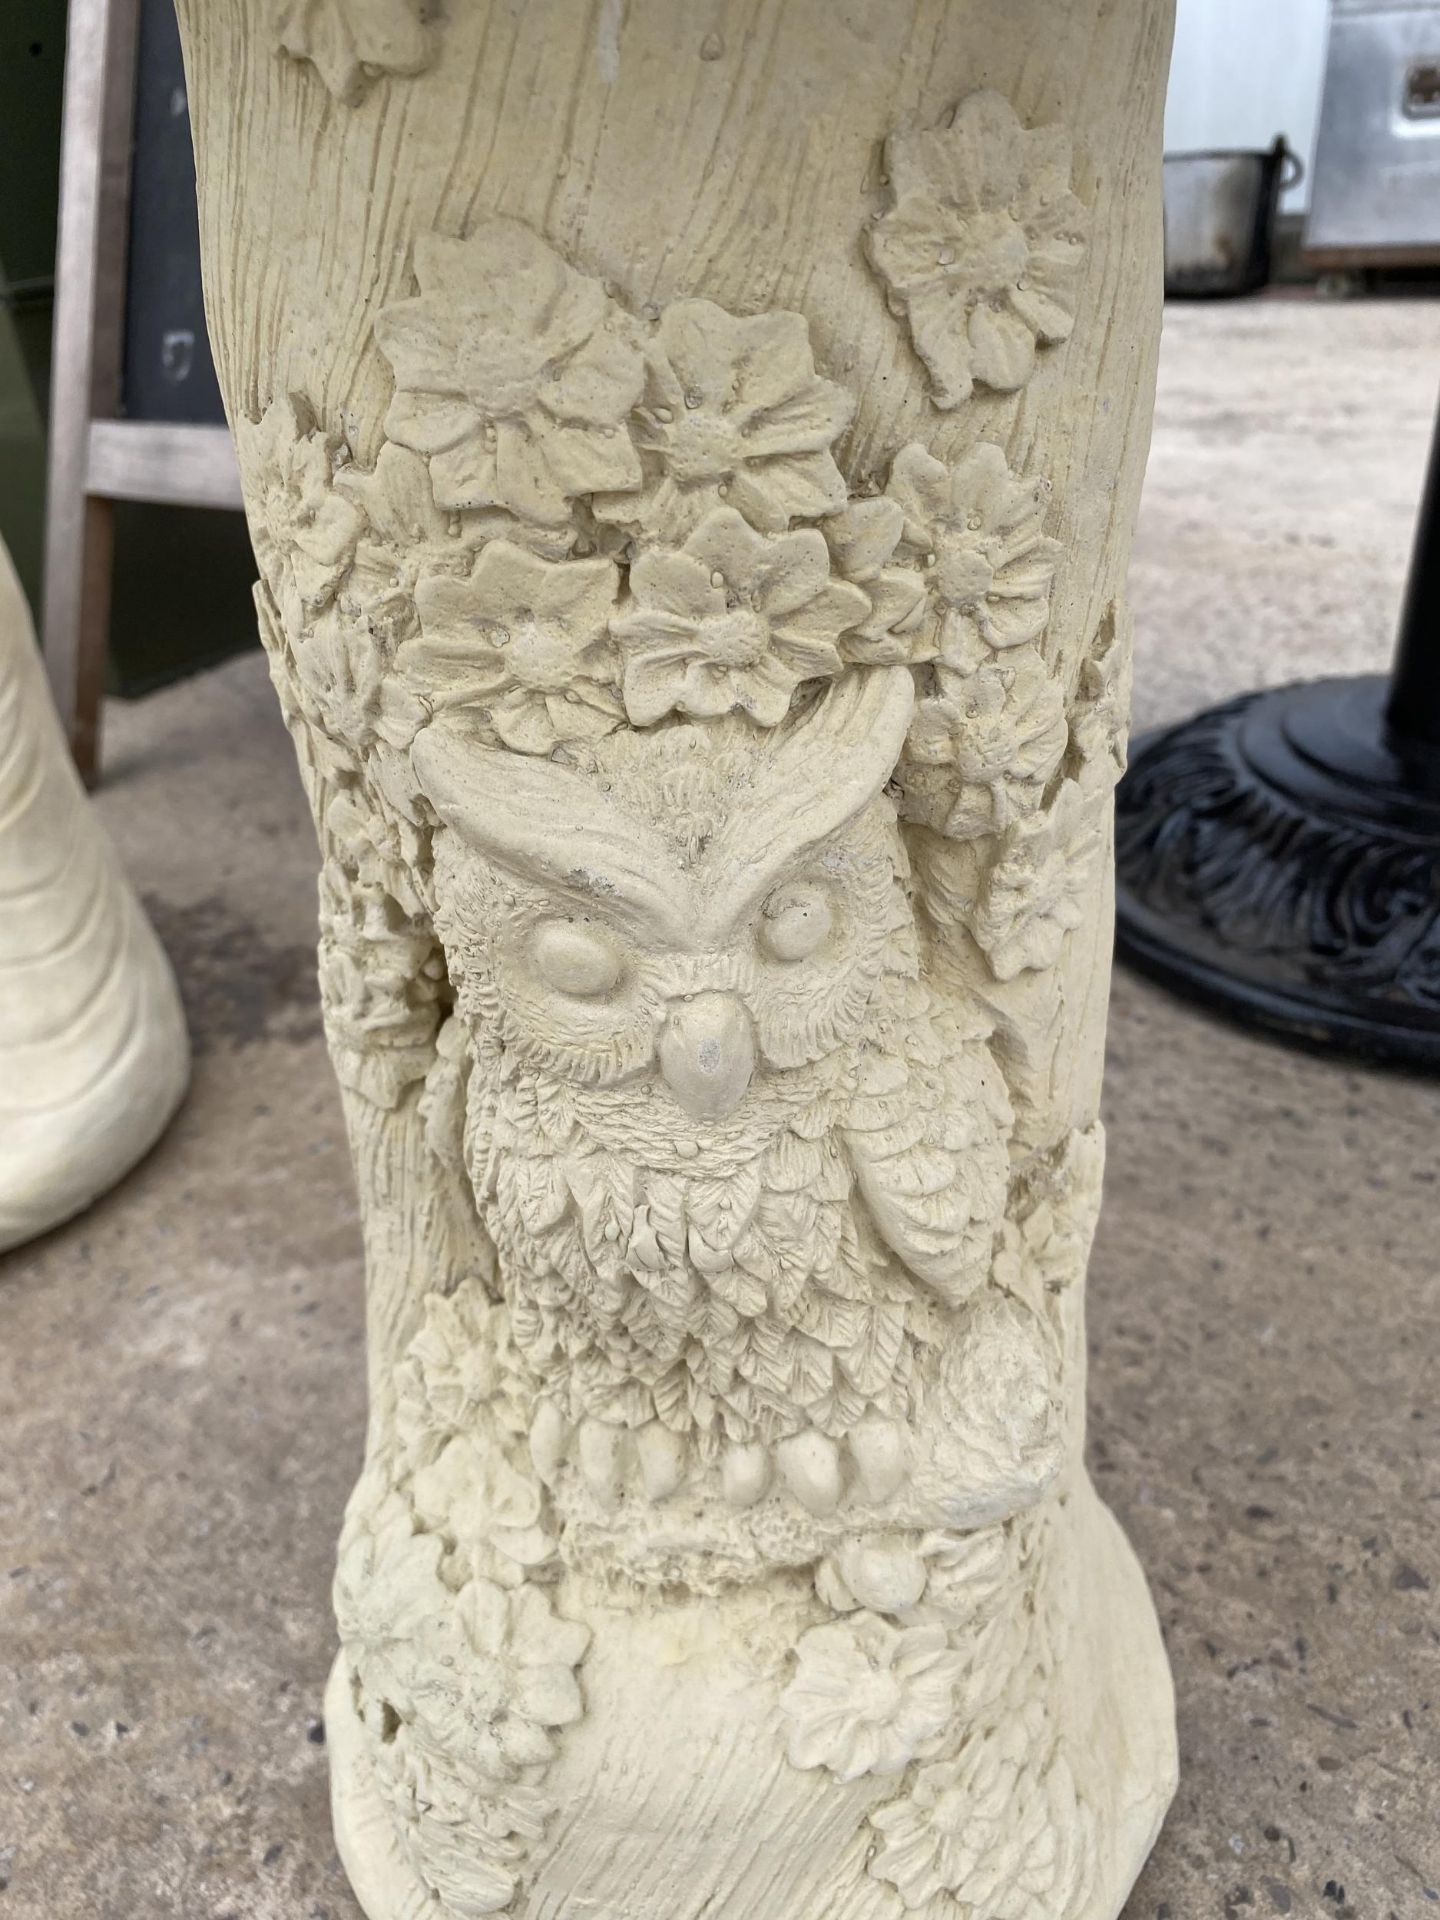 AN AS NEW EX DISPLAY CONCRETE 'OWL BIRDBATH' *PLEASE NOTE VAT TO BE PAID ON THIS ITEM* - Image 2 of 5